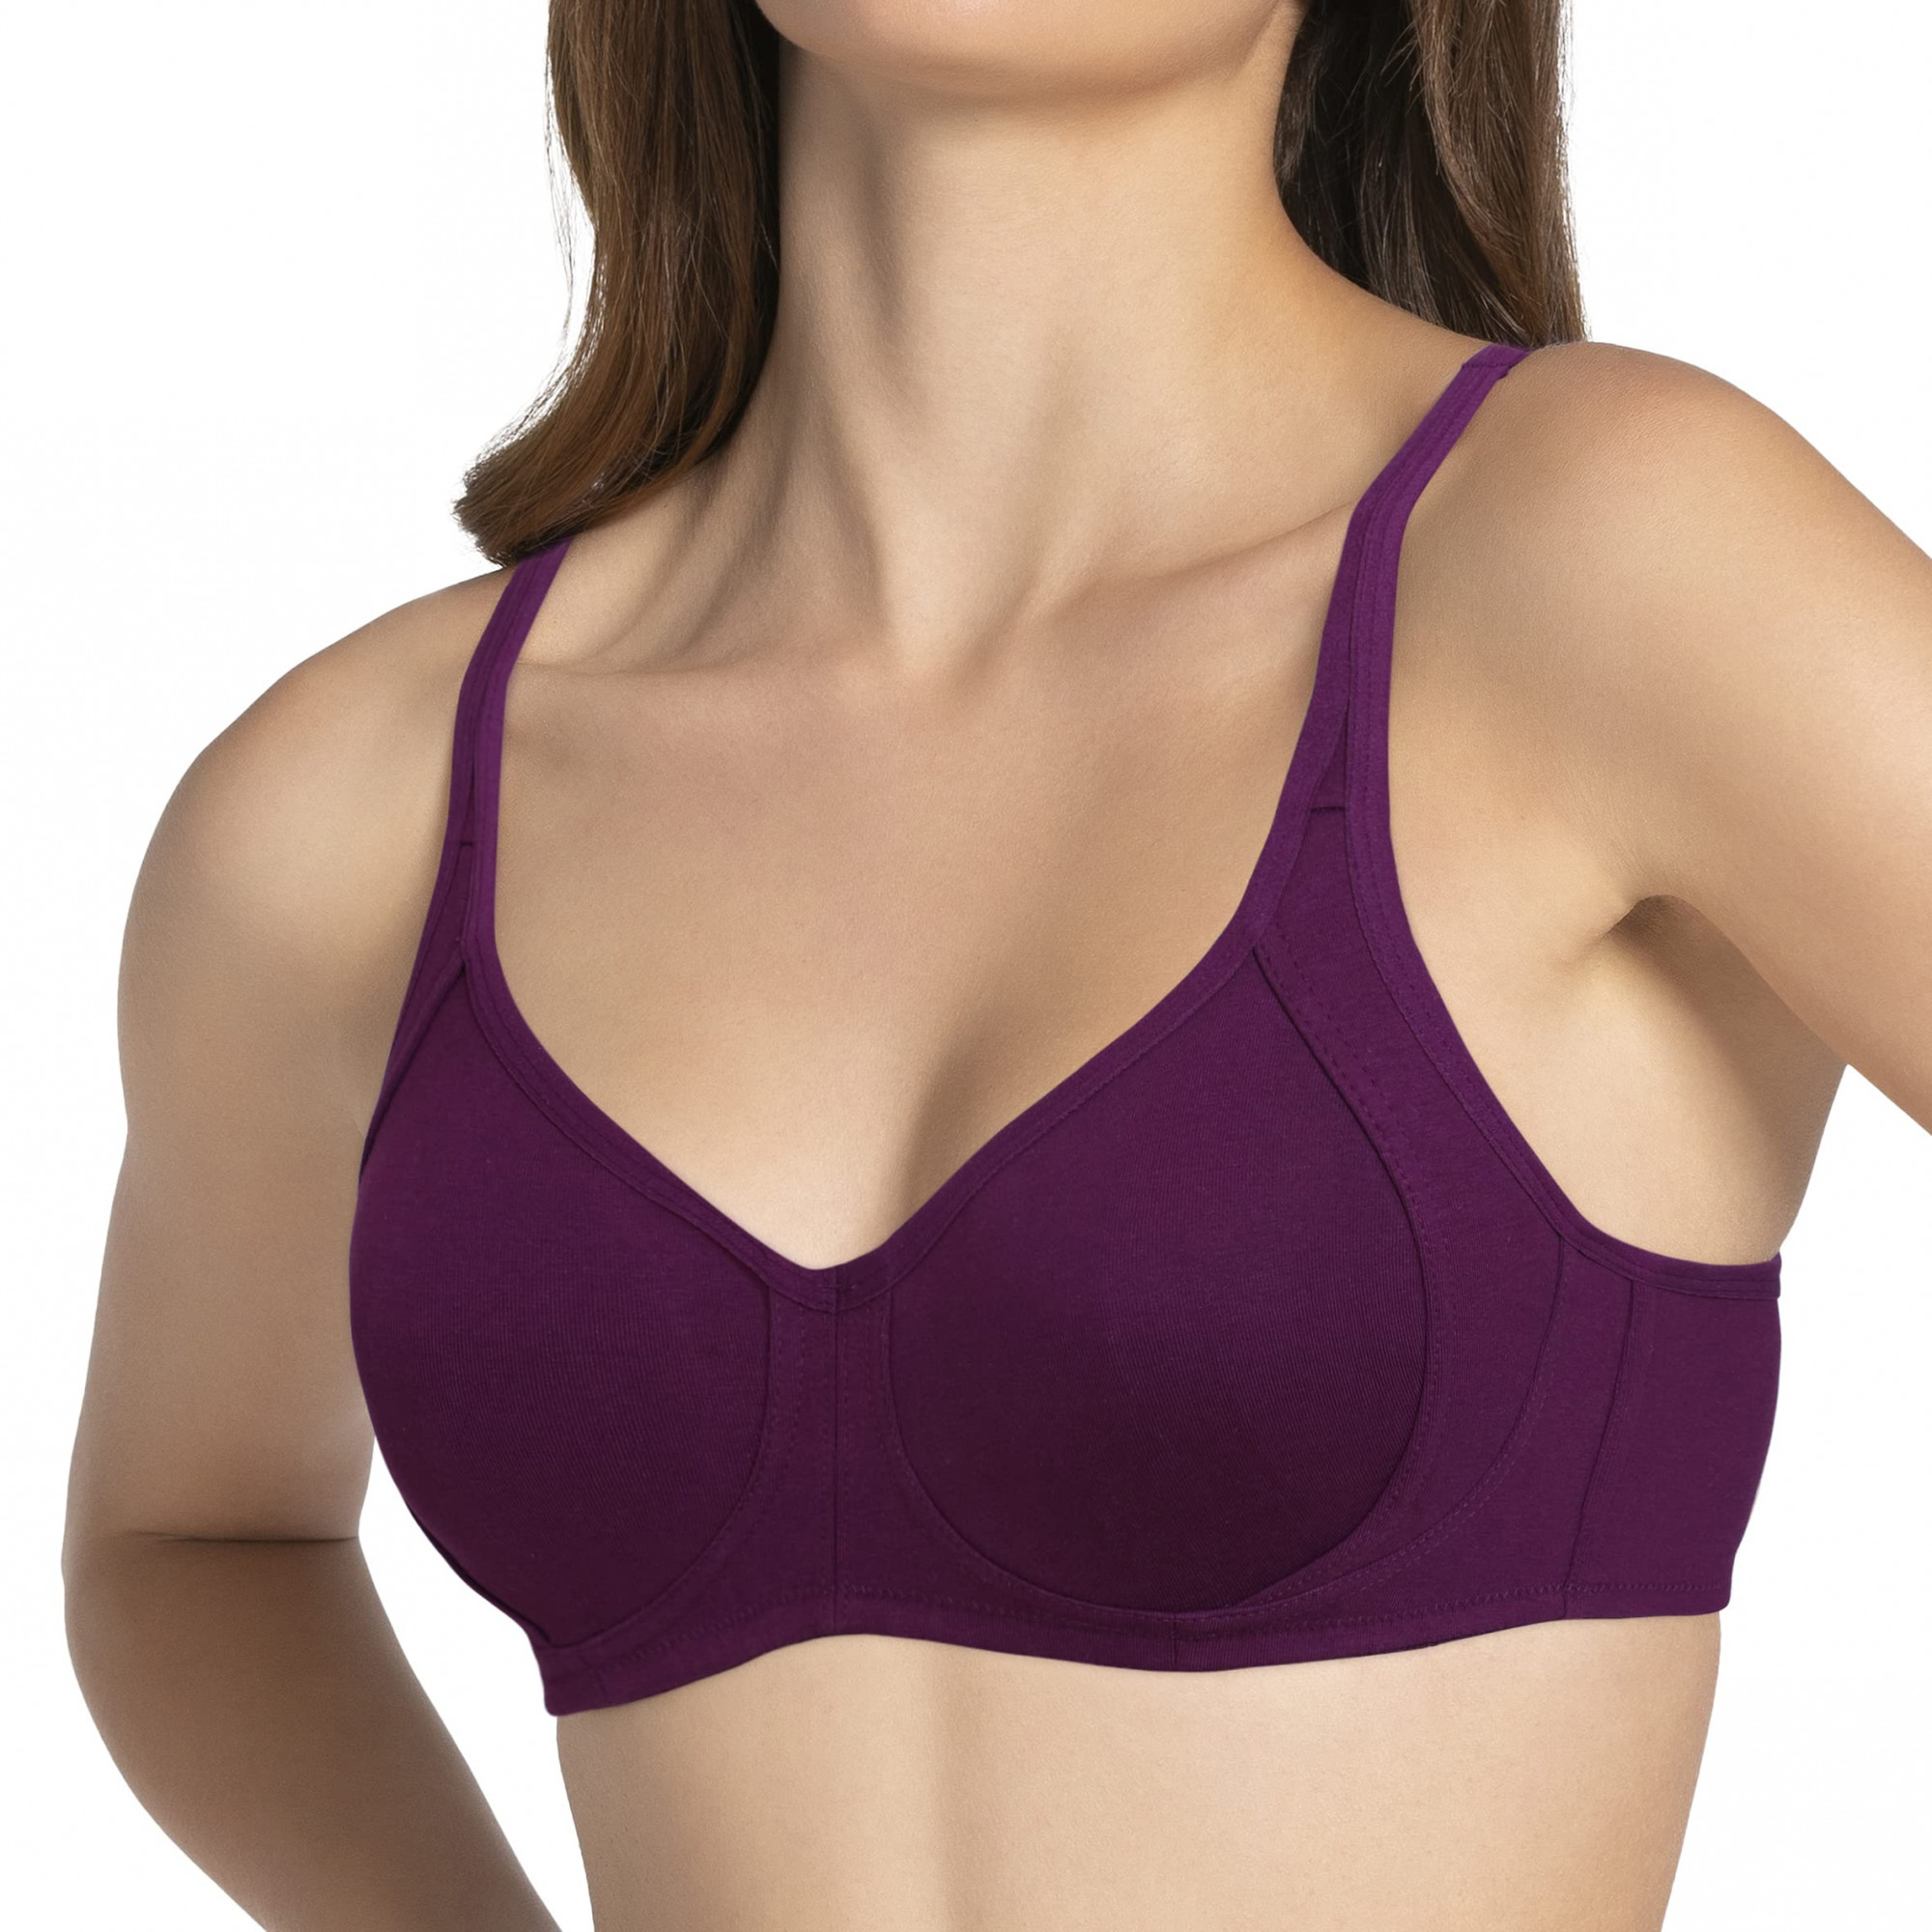 Enamor Cotton 38b Strapless Bra - Get Best Price from Manufacturers &  Suppliers in India